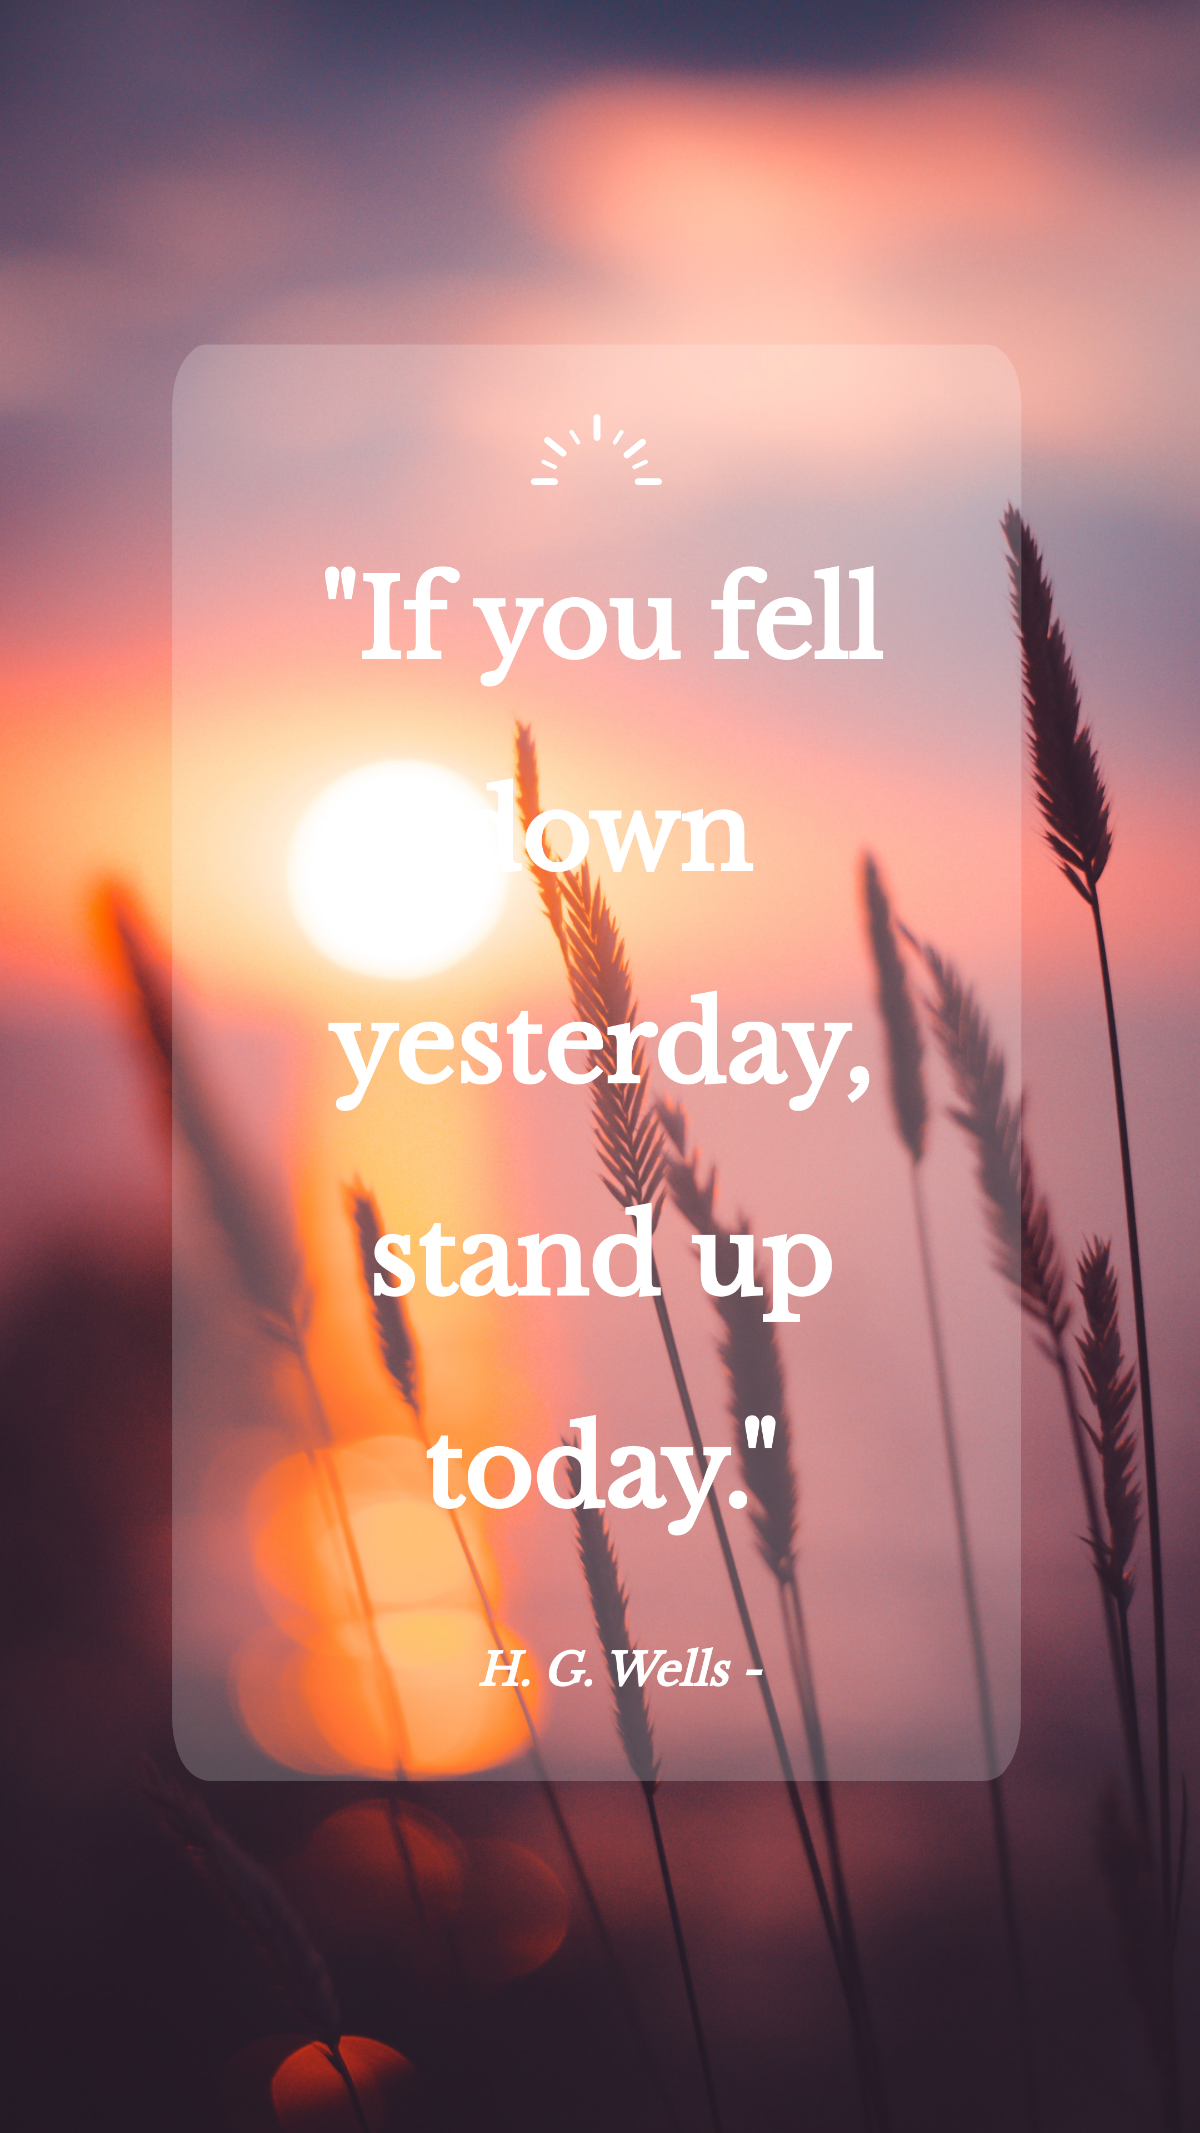 H. G. Wells - If you fell down yesterday, stand up today. Template